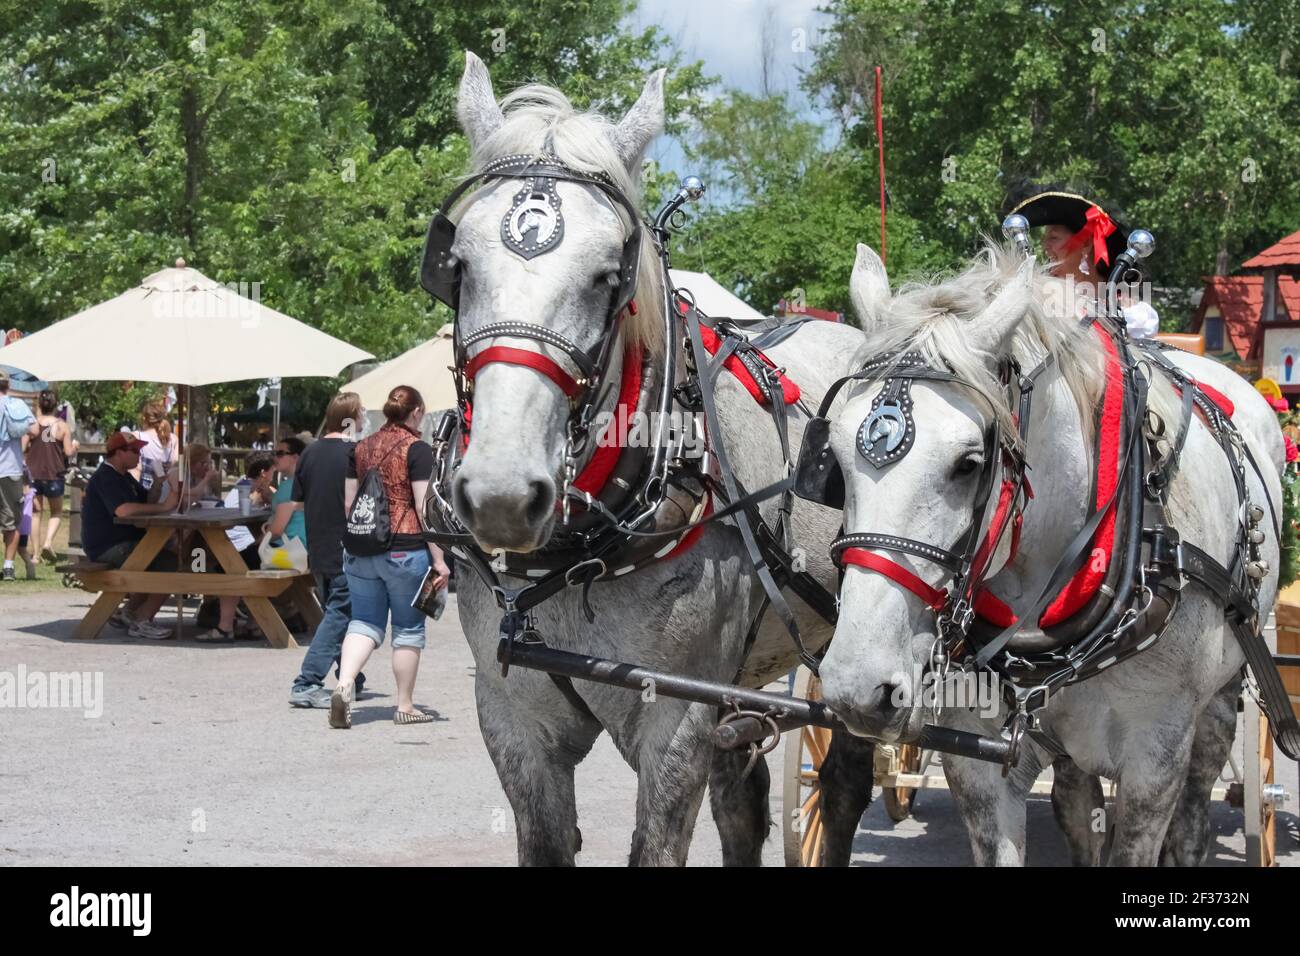 Muskogee Oklahoma May 22 2010-Beautiful pair of matched white horses in pretty harness with lots of red and blinders and bells pull wagon Stock Photo